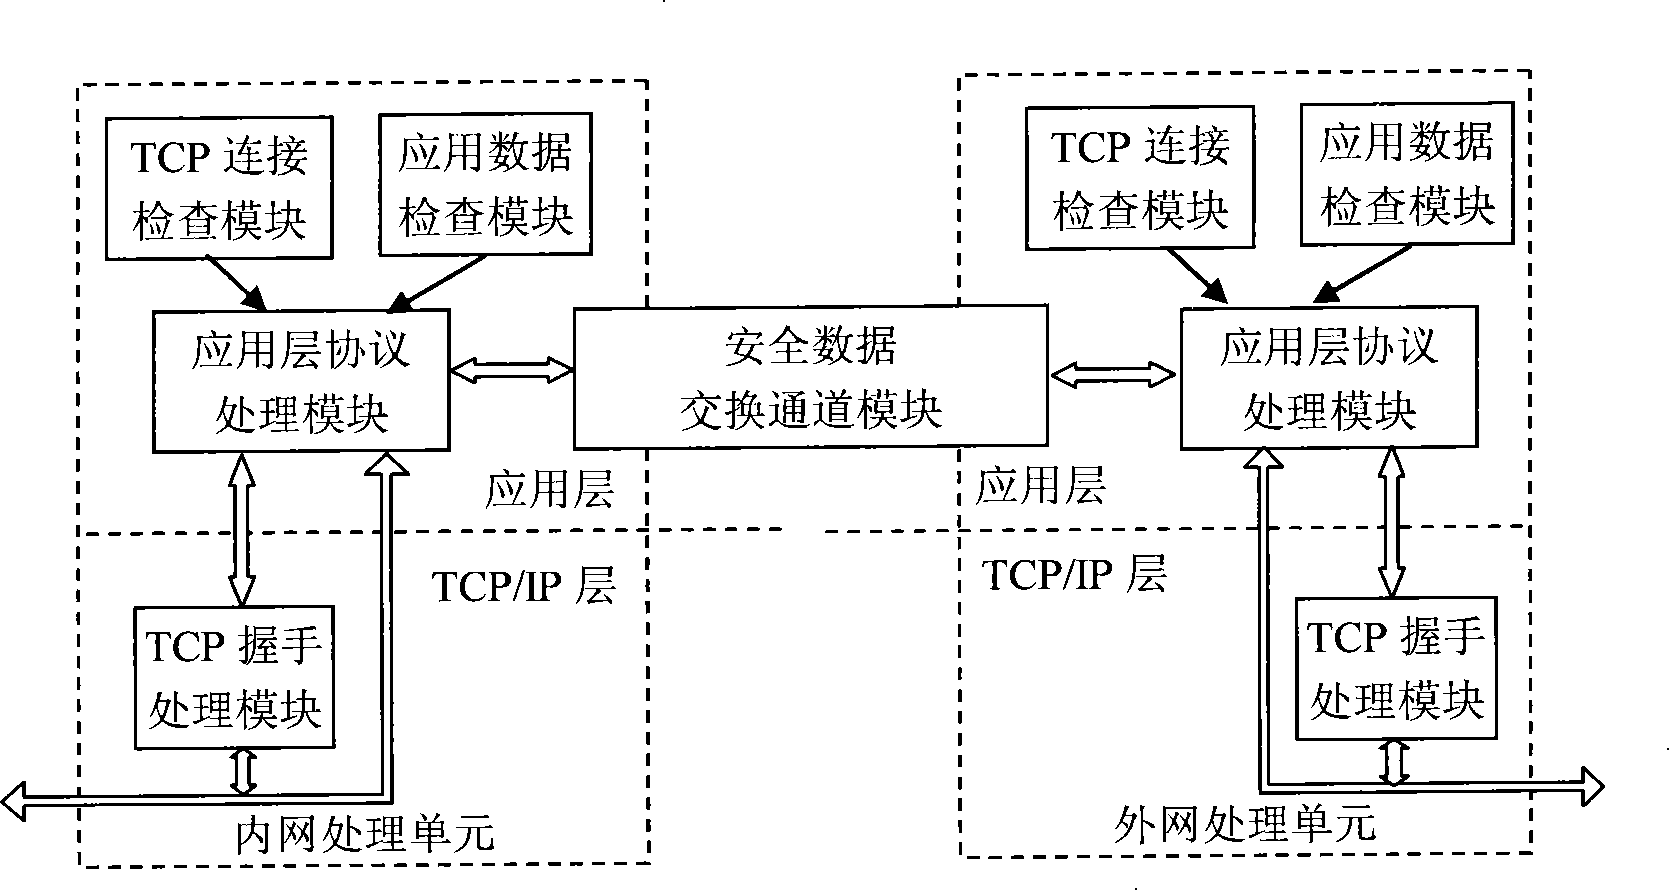 TCP connection separation with complete semantic, control method and system